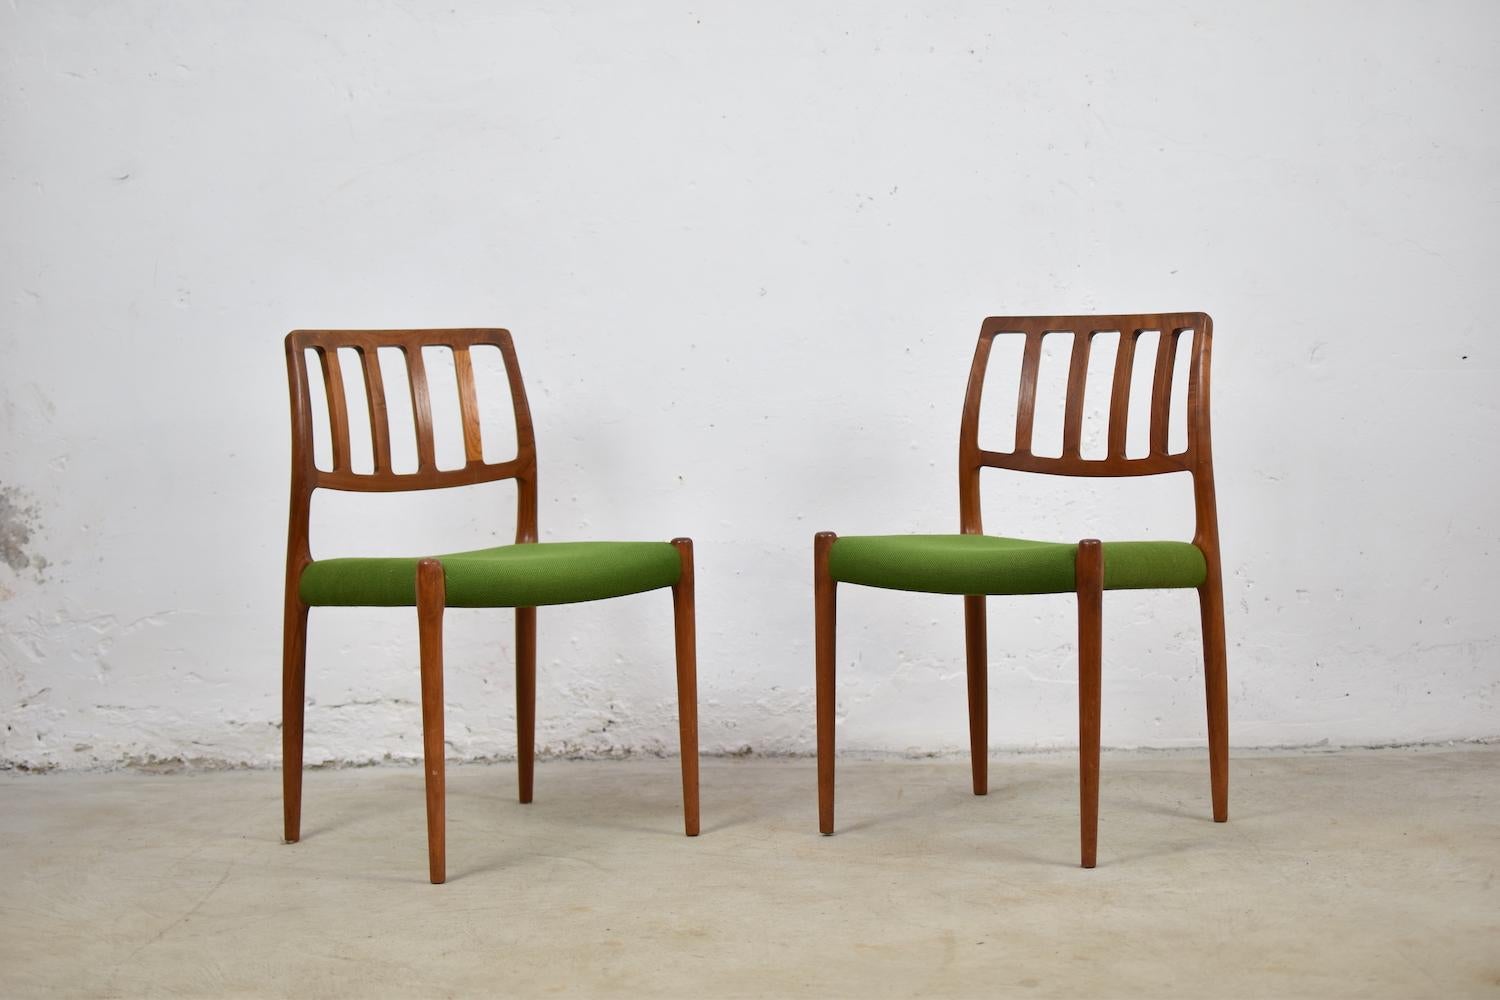 Lovely set of 4 ‘Model No. 83’ dining chairs by Niels O. Moller for J.L. Møllers Mobelfabrik, Denmark 1960s. These chairs features a frame made out of teak and the original green wool fabric upholstery. Labeled underneath.